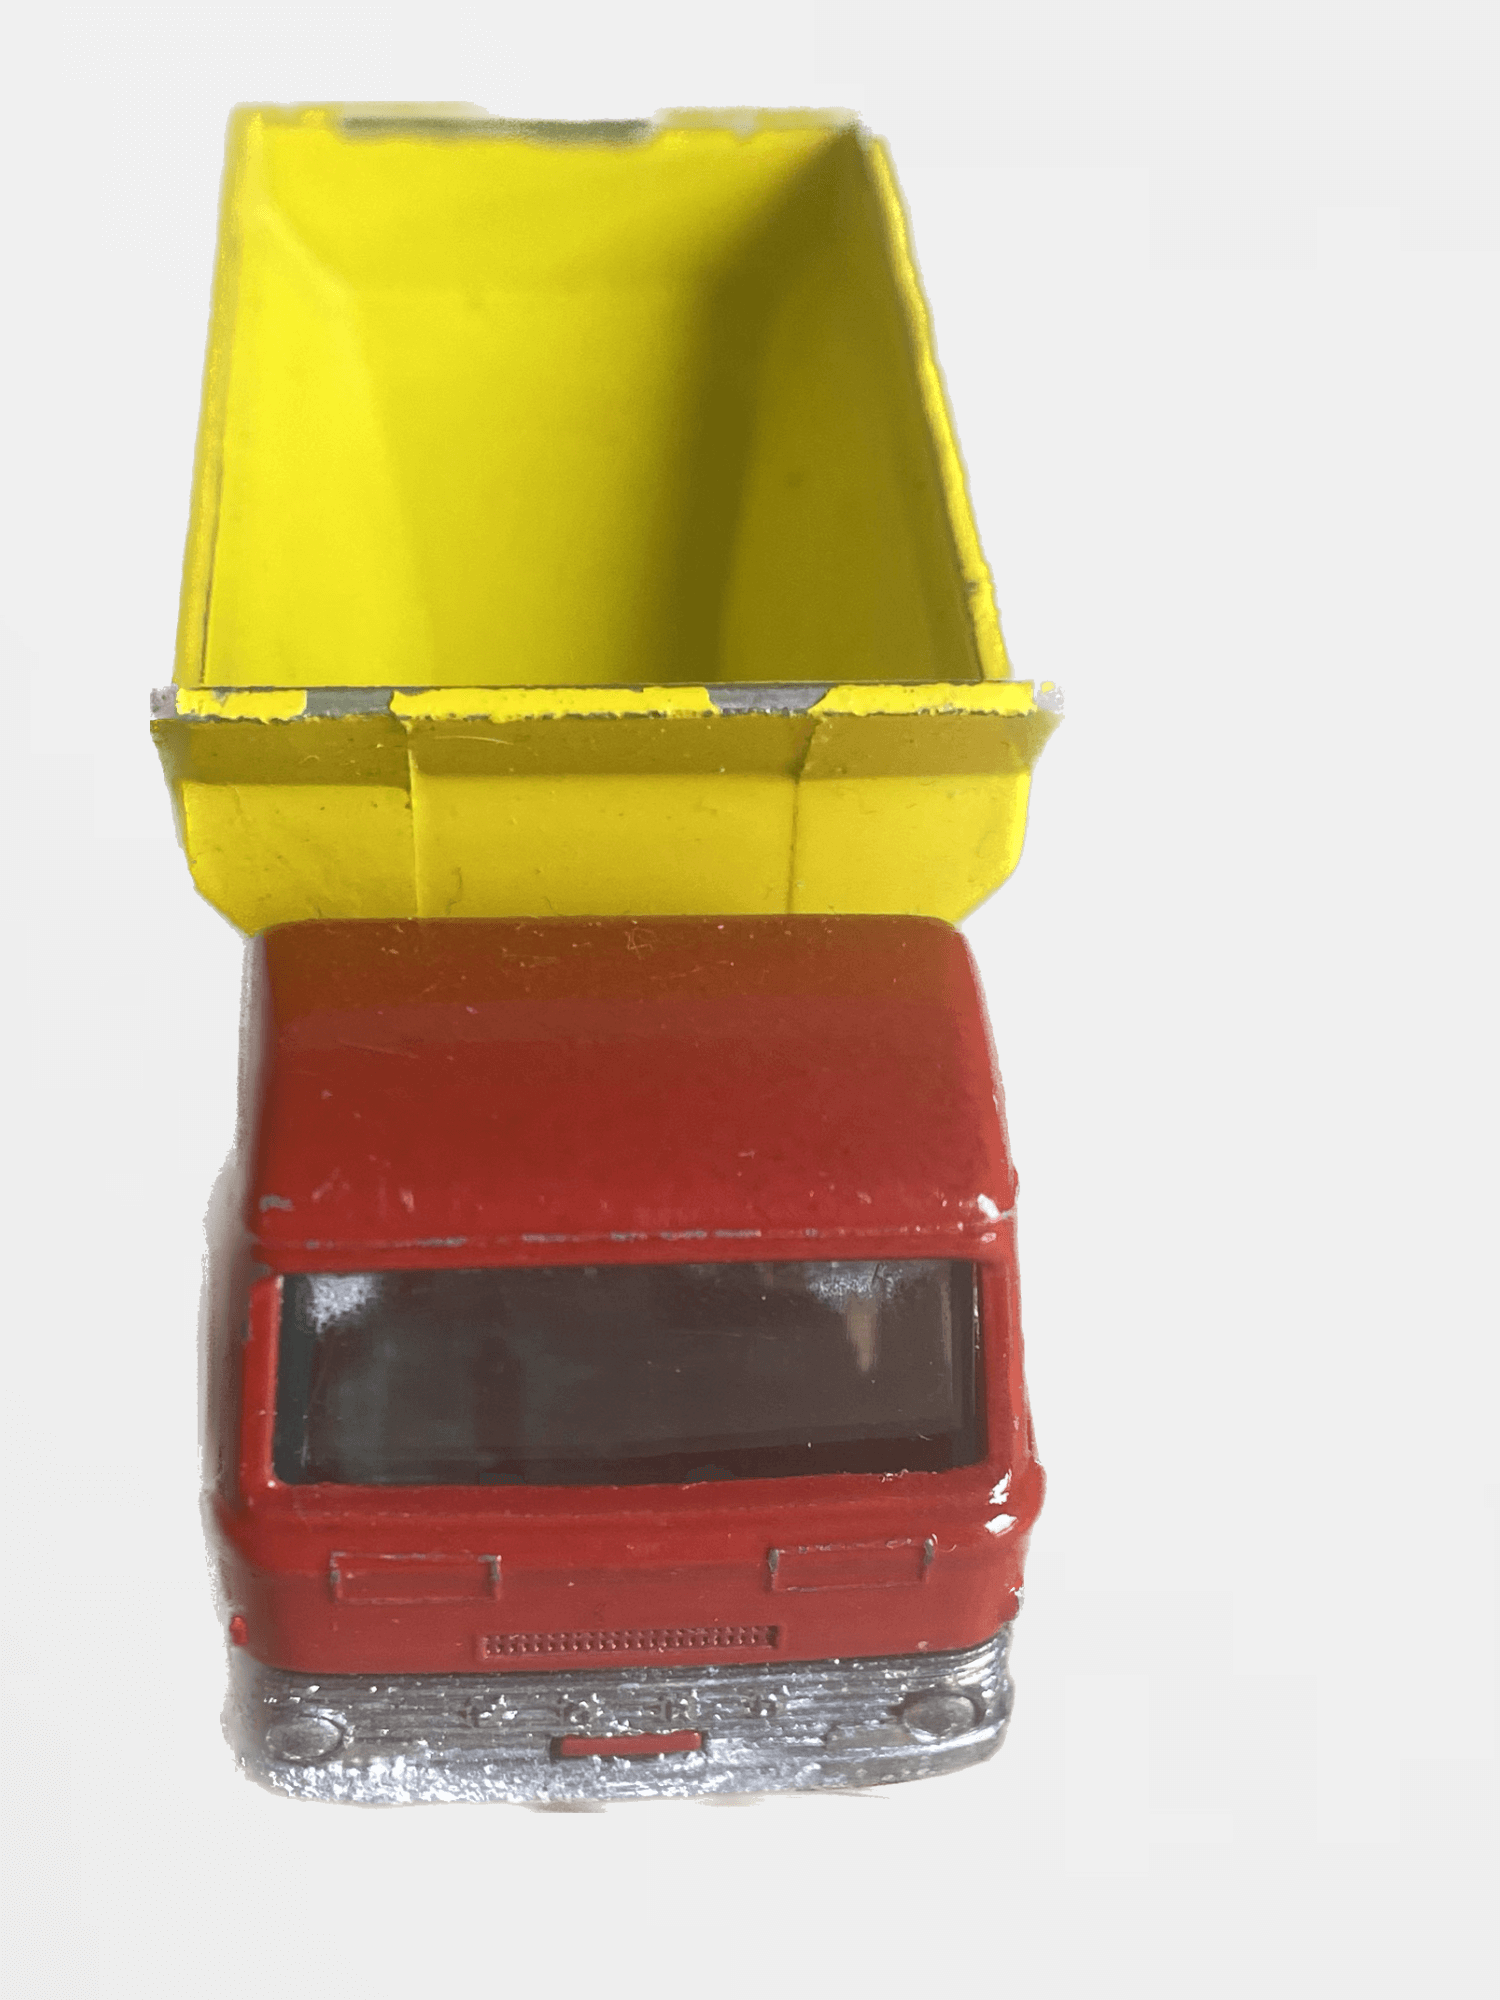 Matchbox 70 Grit-Spreading Truck Diecast Toy Car Vintage Lesney Yellow England c1960s Collectors Antique Original Toys Cars Trendy Collectible Collection